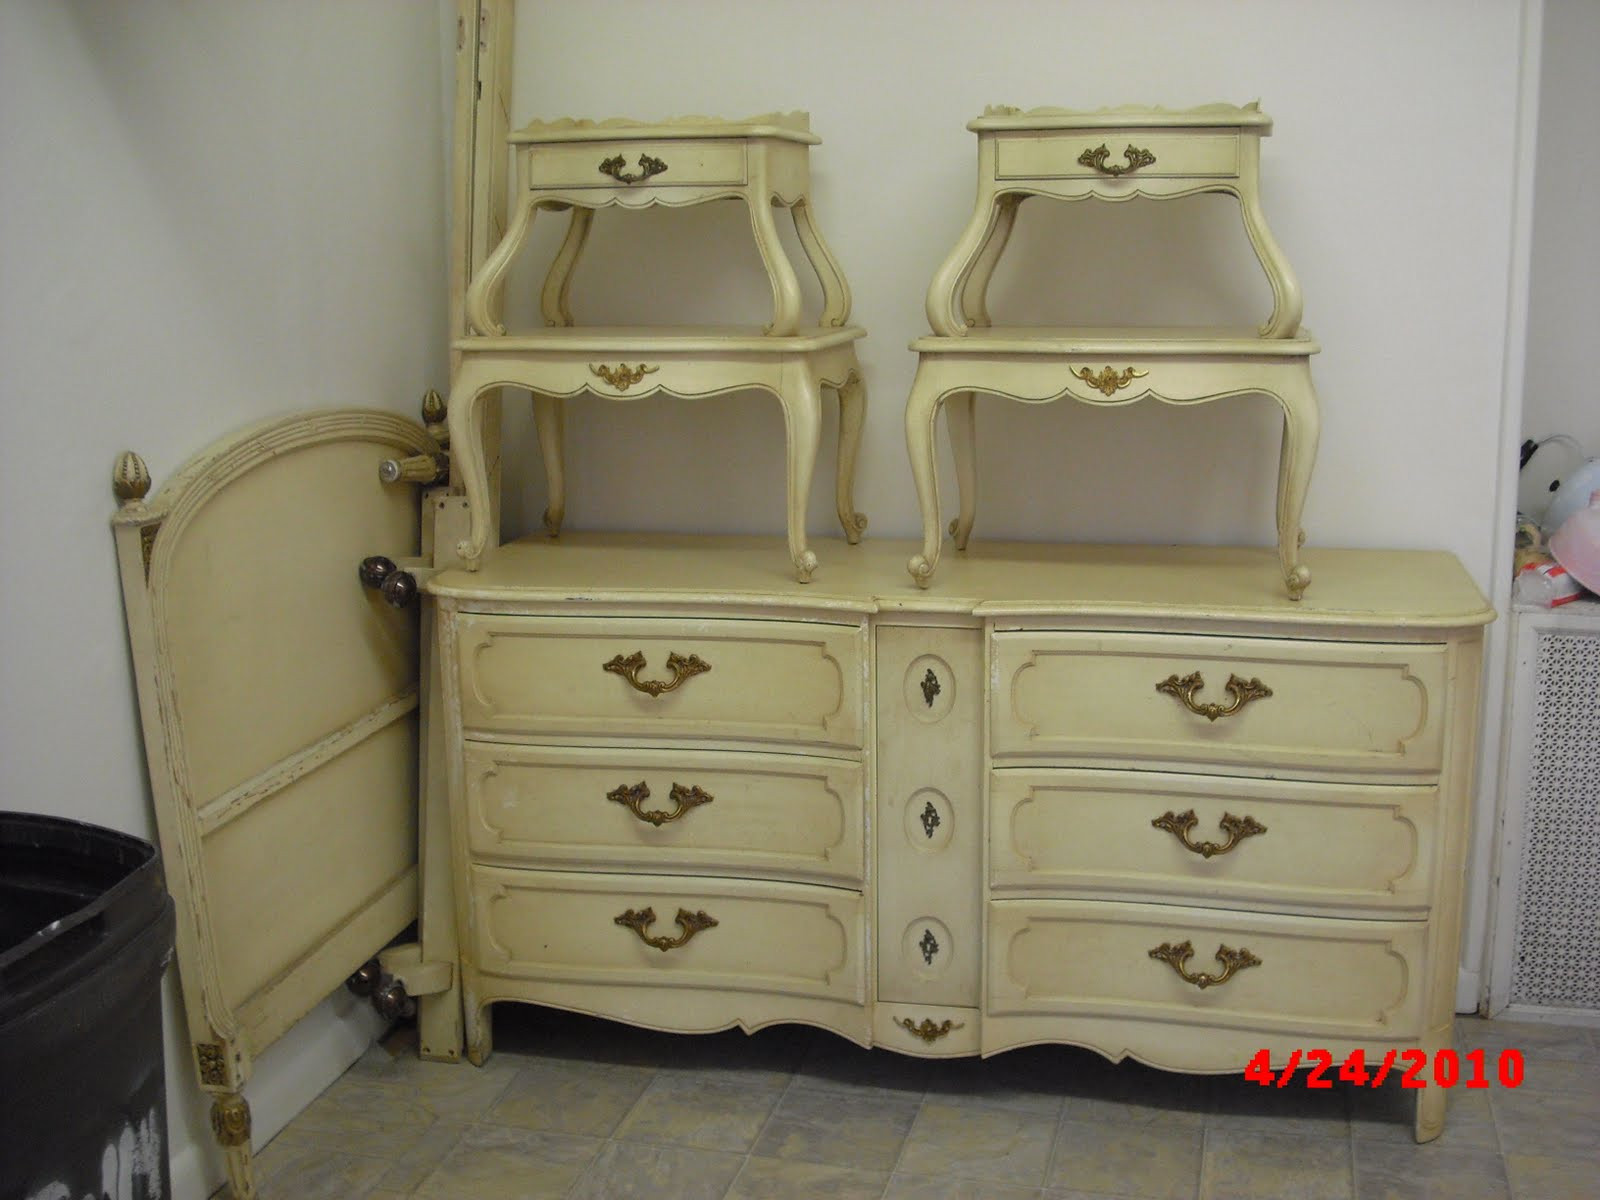 Painted Bedroom Sets
 Handpainted Furniture Blog Shabby Chic Vintage Painted